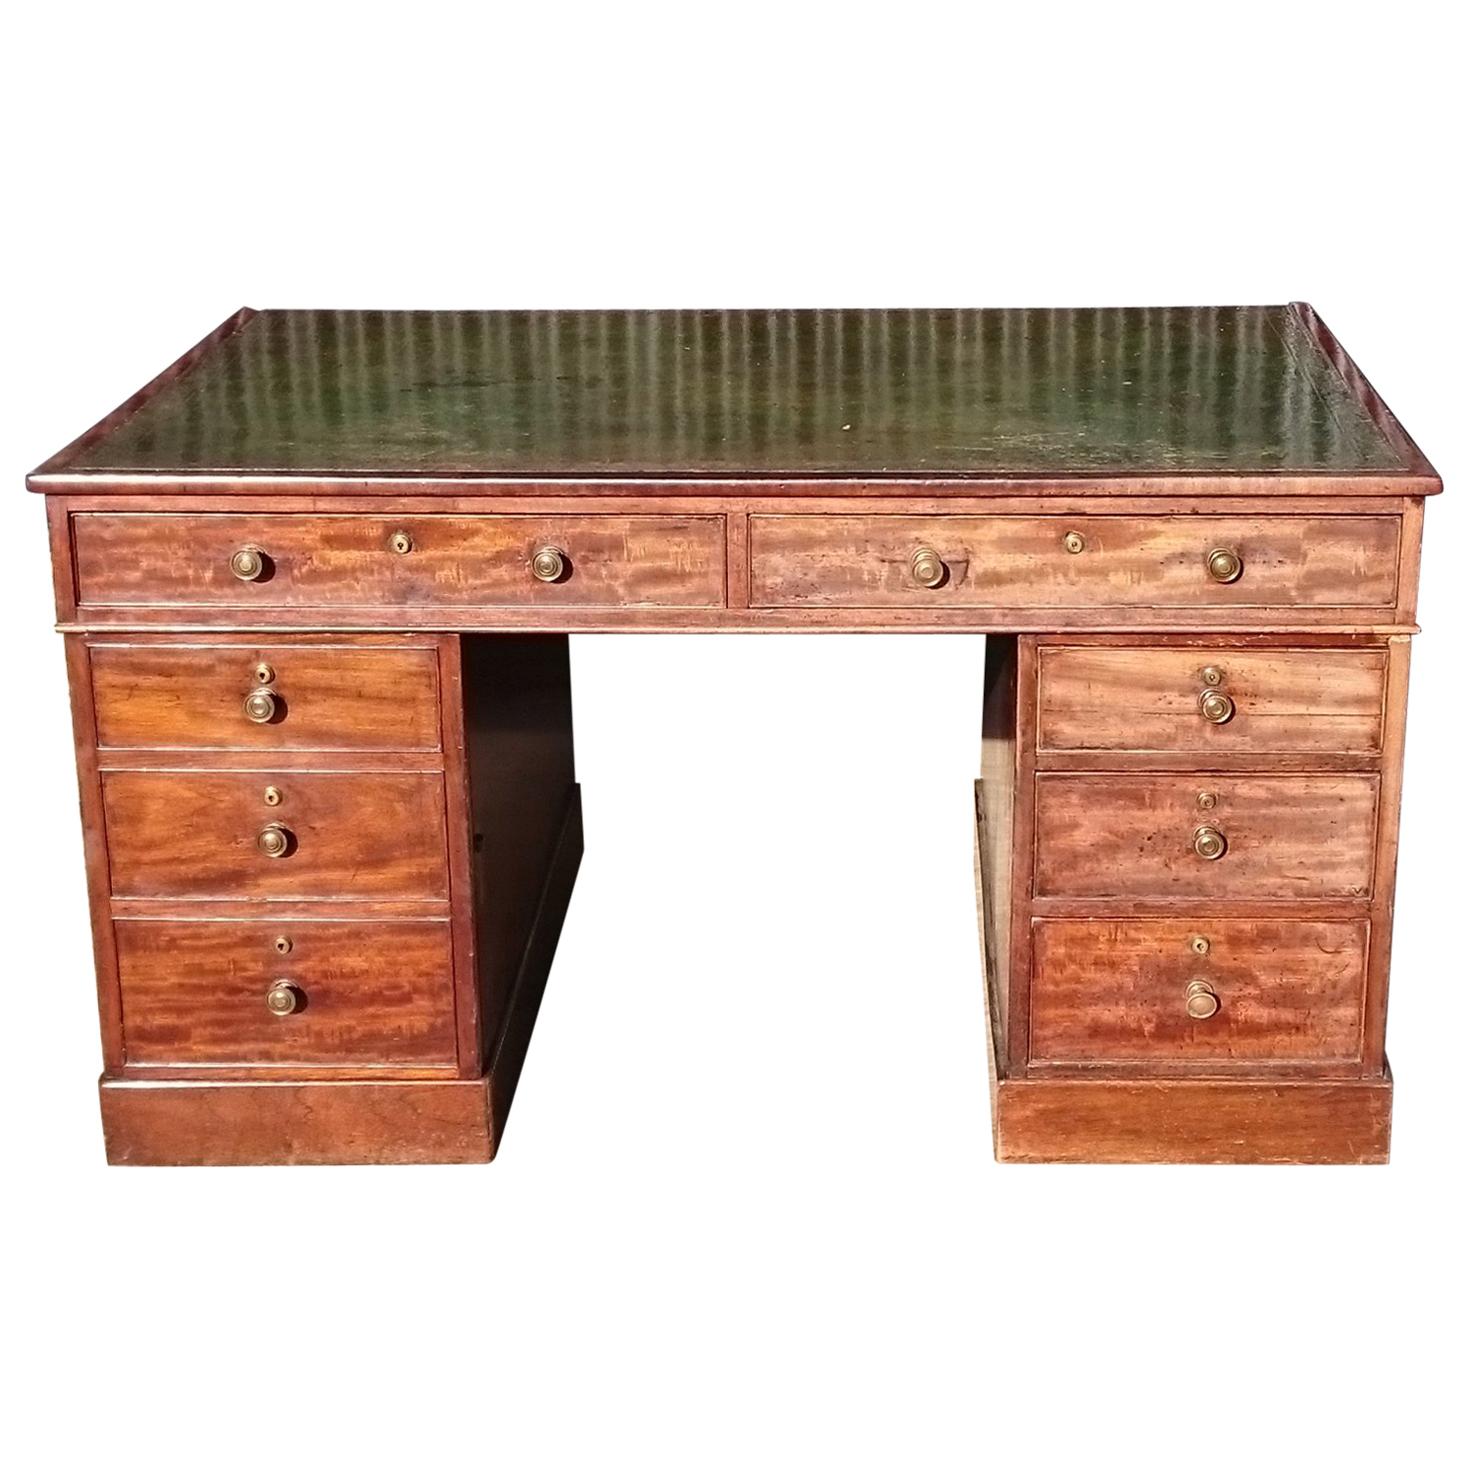 Early 19th Century Mahogany Antique Pedestal Desk For Sale